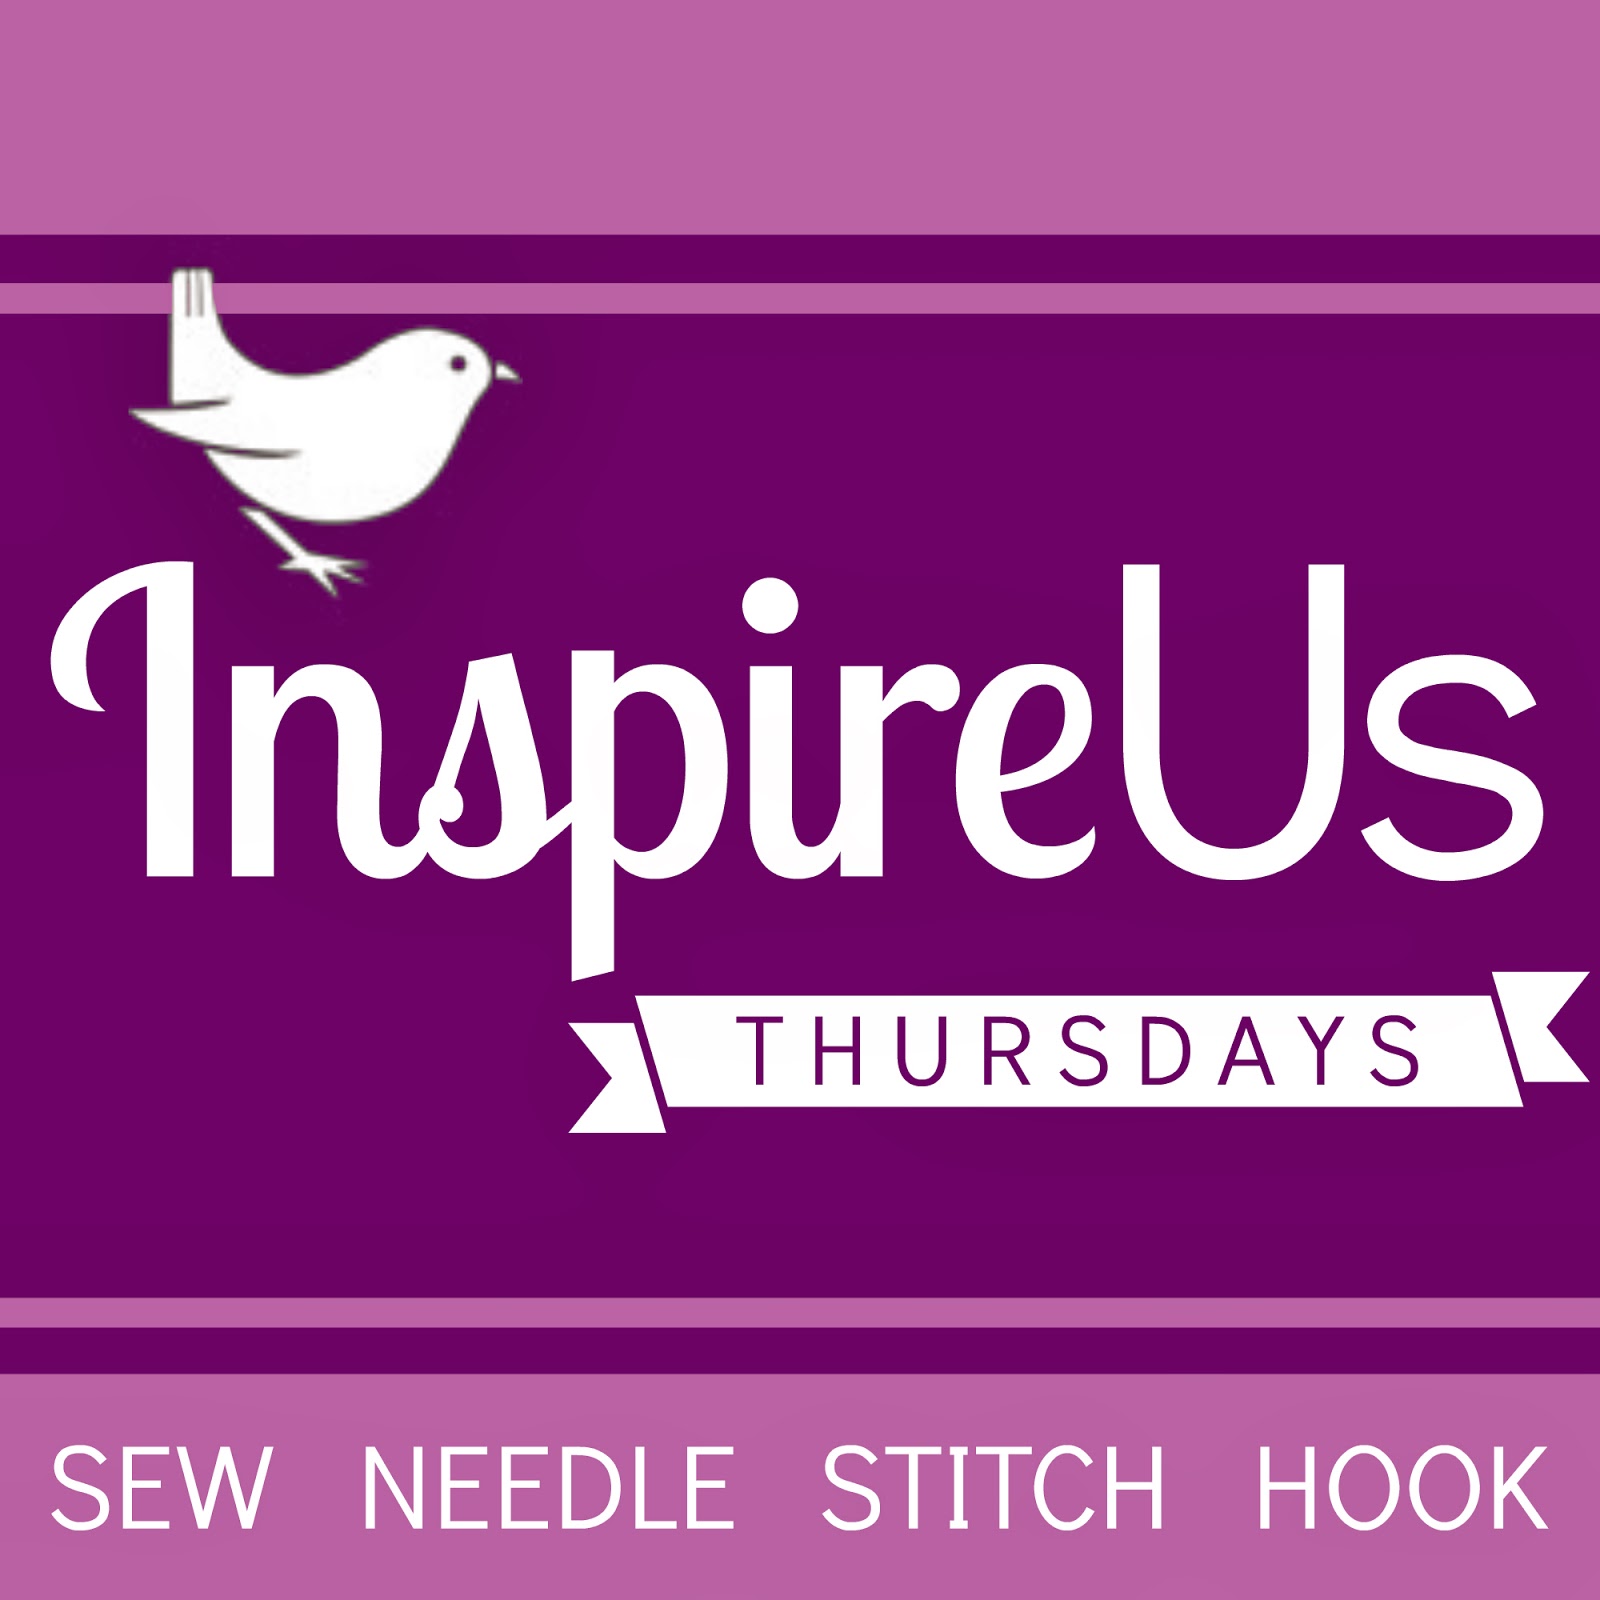 Inspire Us Thursdays: Sew Needle Stitch Hook, a new Link Party beginning April 3! | The Inspired Wren